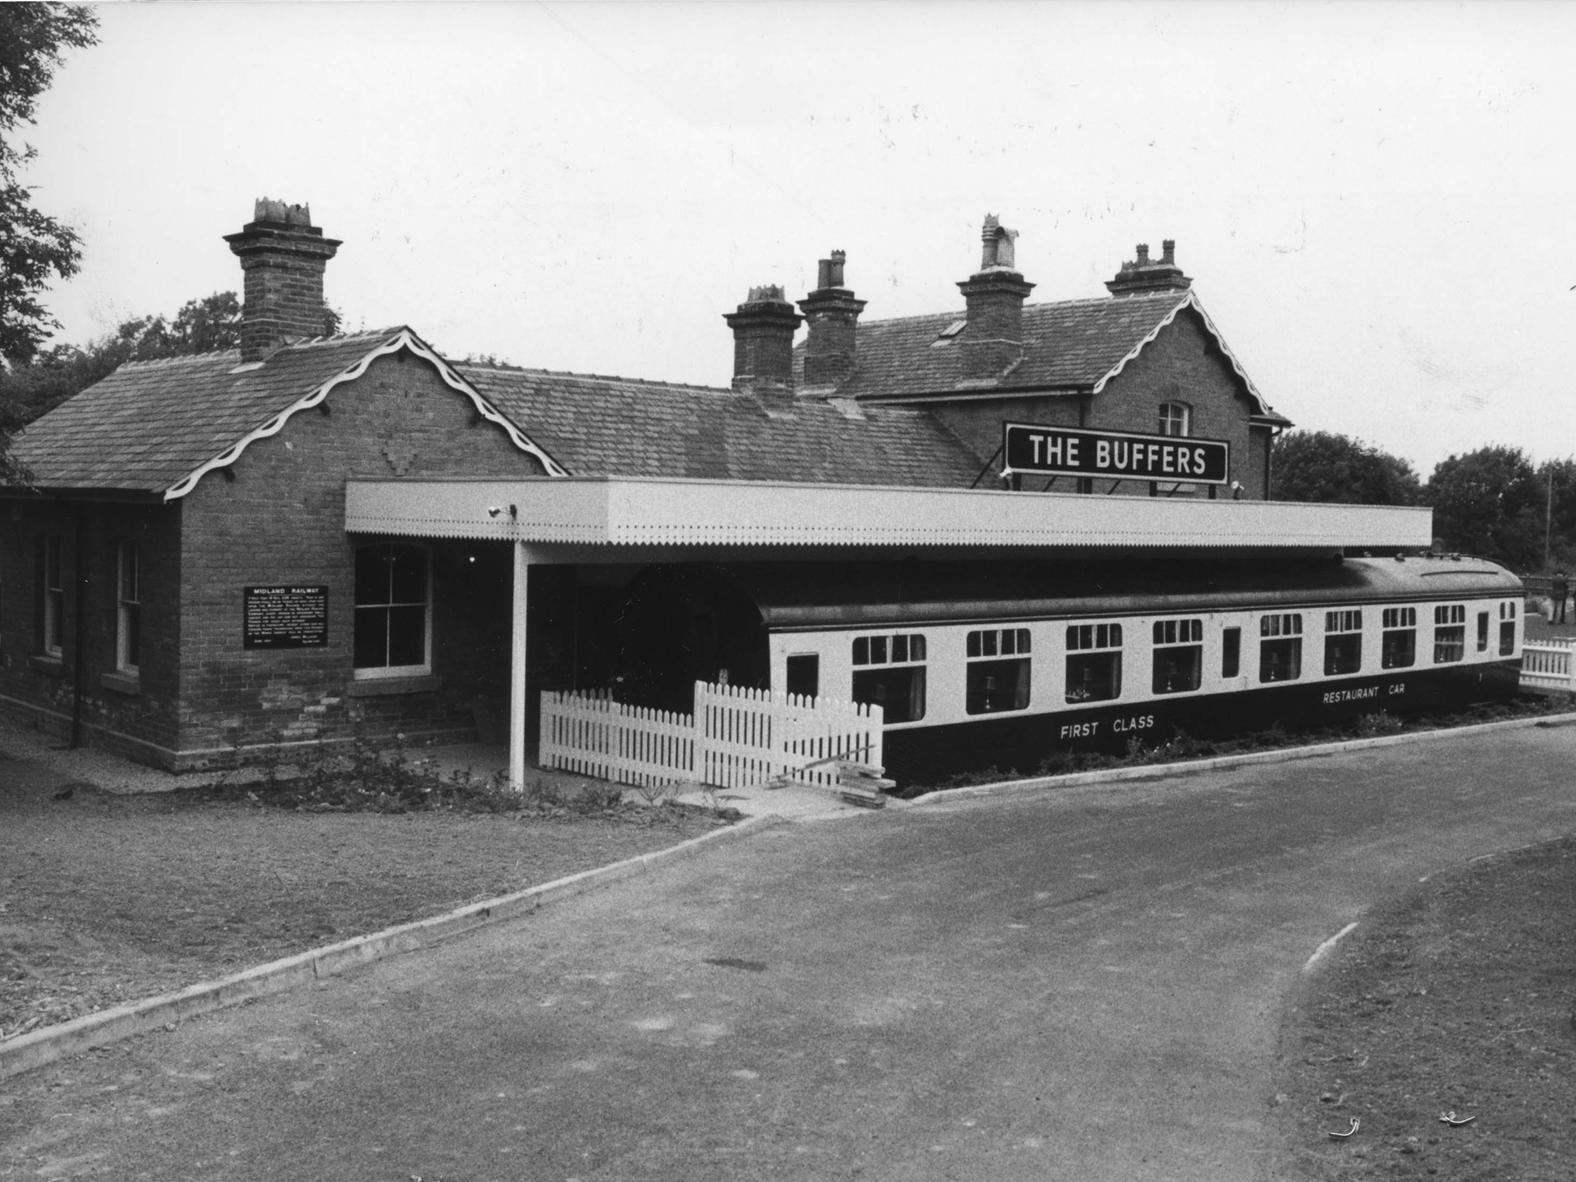 Closed in January 1964. The former station building is now a restaurant, which from 1984 to 1999 used a Mk 1 railway carriage as extra rooms.